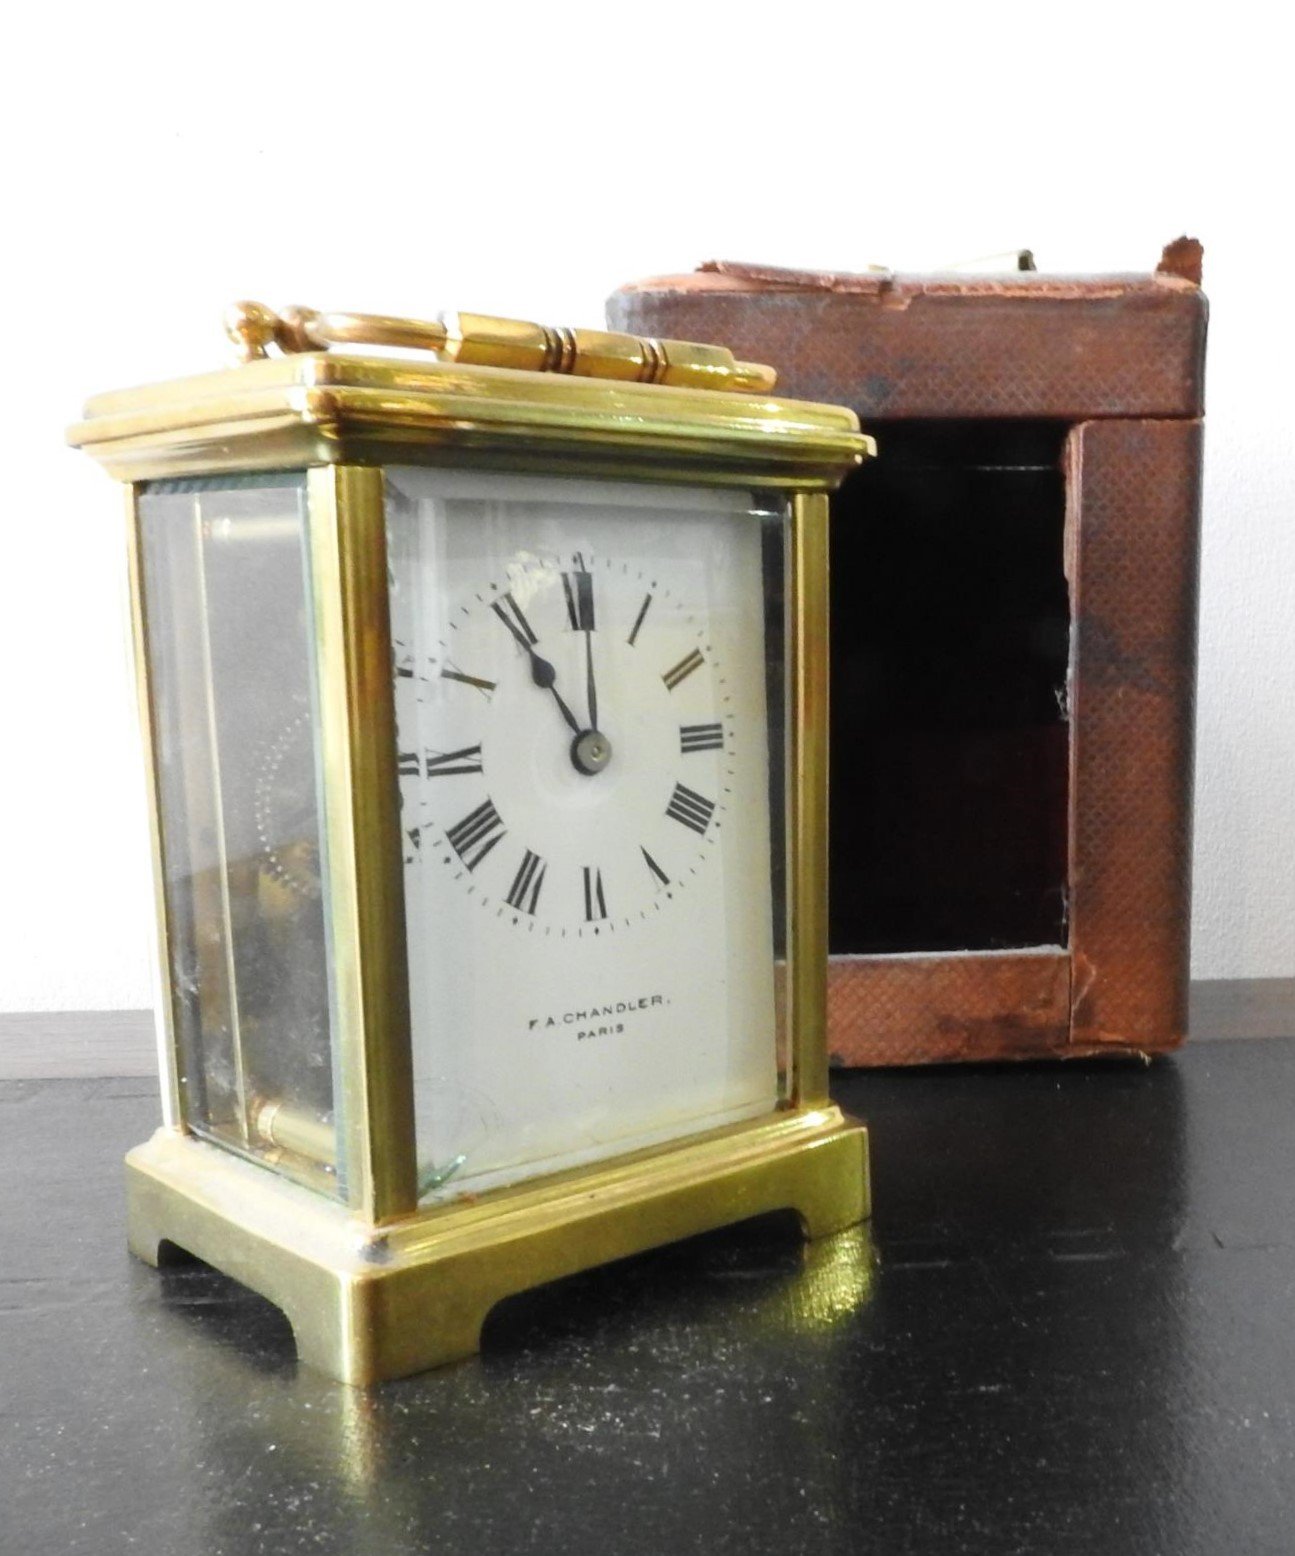 A FRENCH BRASS CARRIAGE CLOCK WITH CARRY CASE AND KEY, inscribed F.A Chandler, Paris, 15 cm high